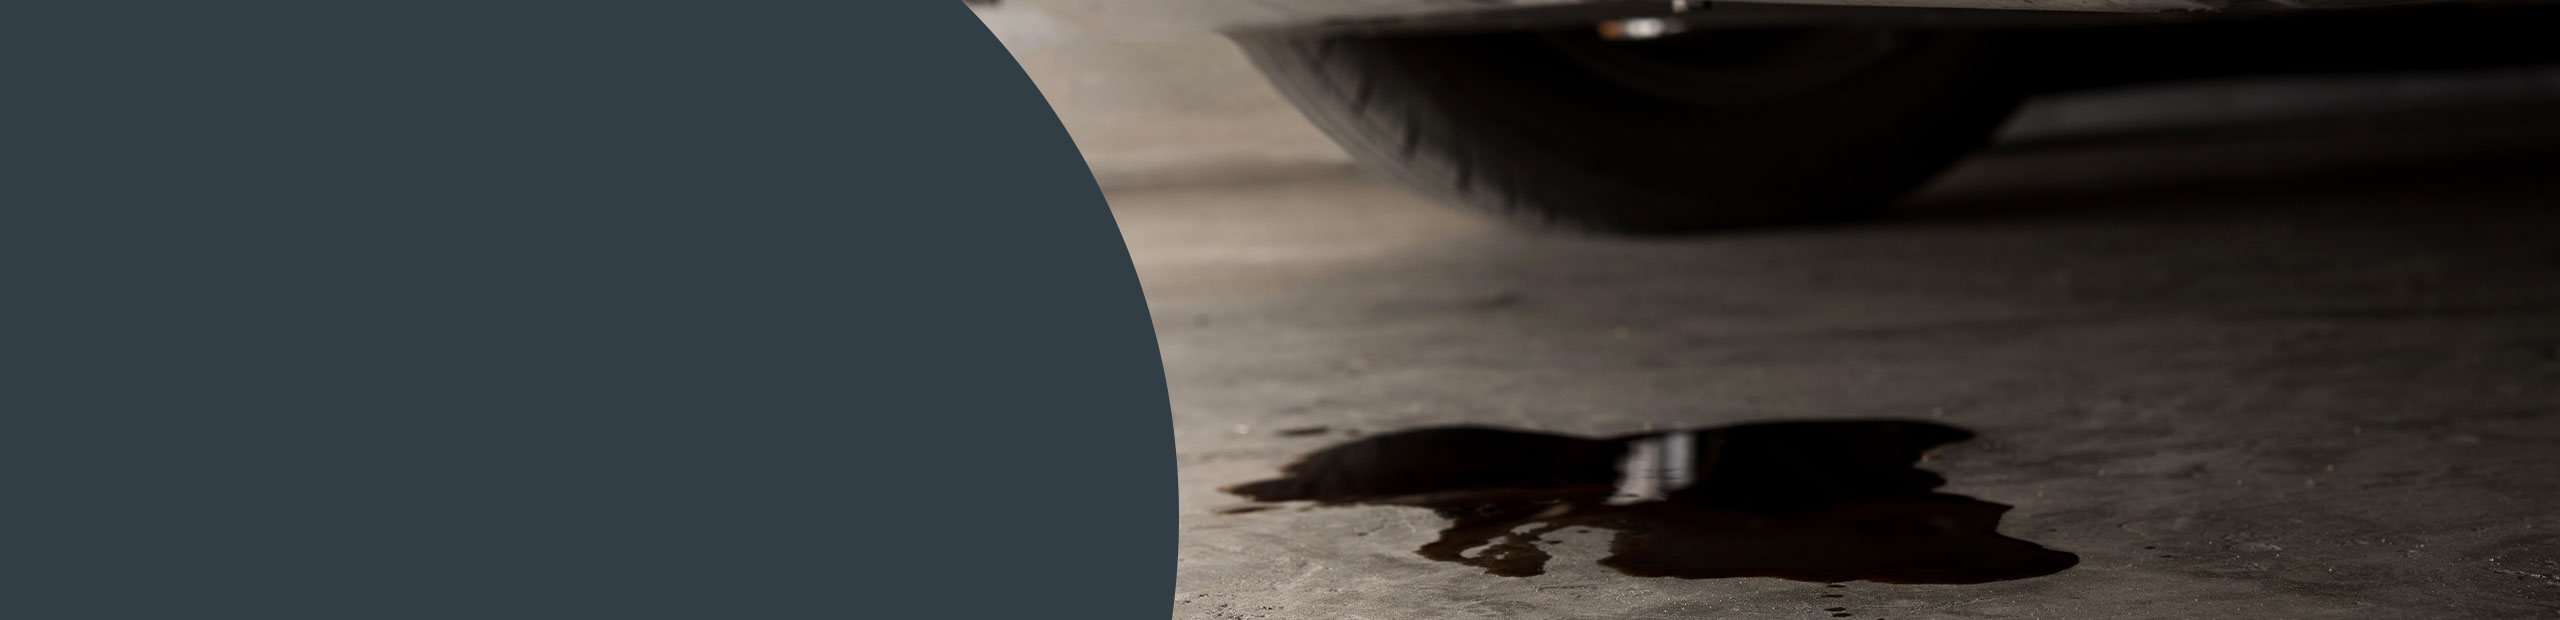 Oil Spill Cleaning Services - Canterbury